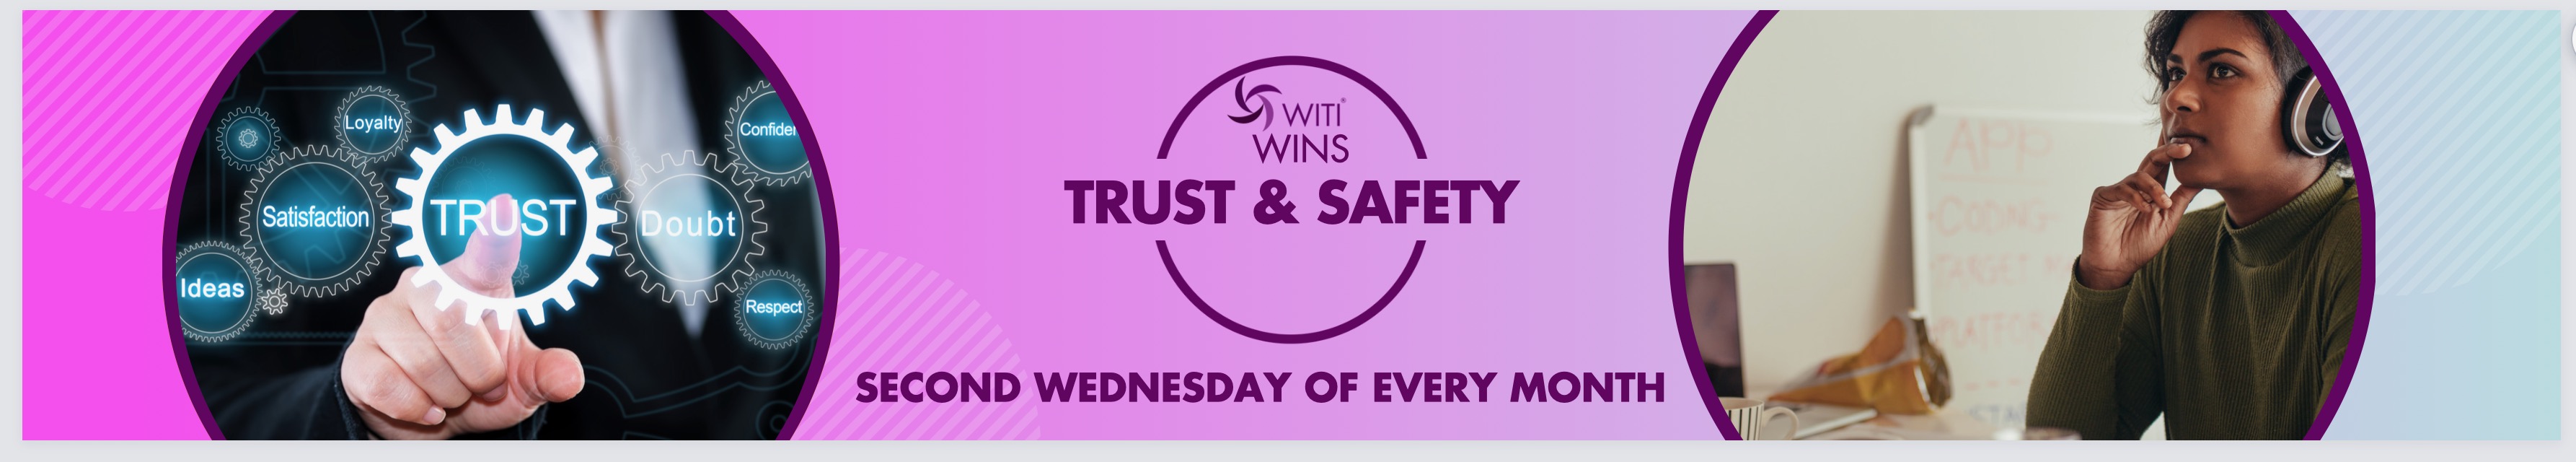 WITI WINS - Trust And Safety